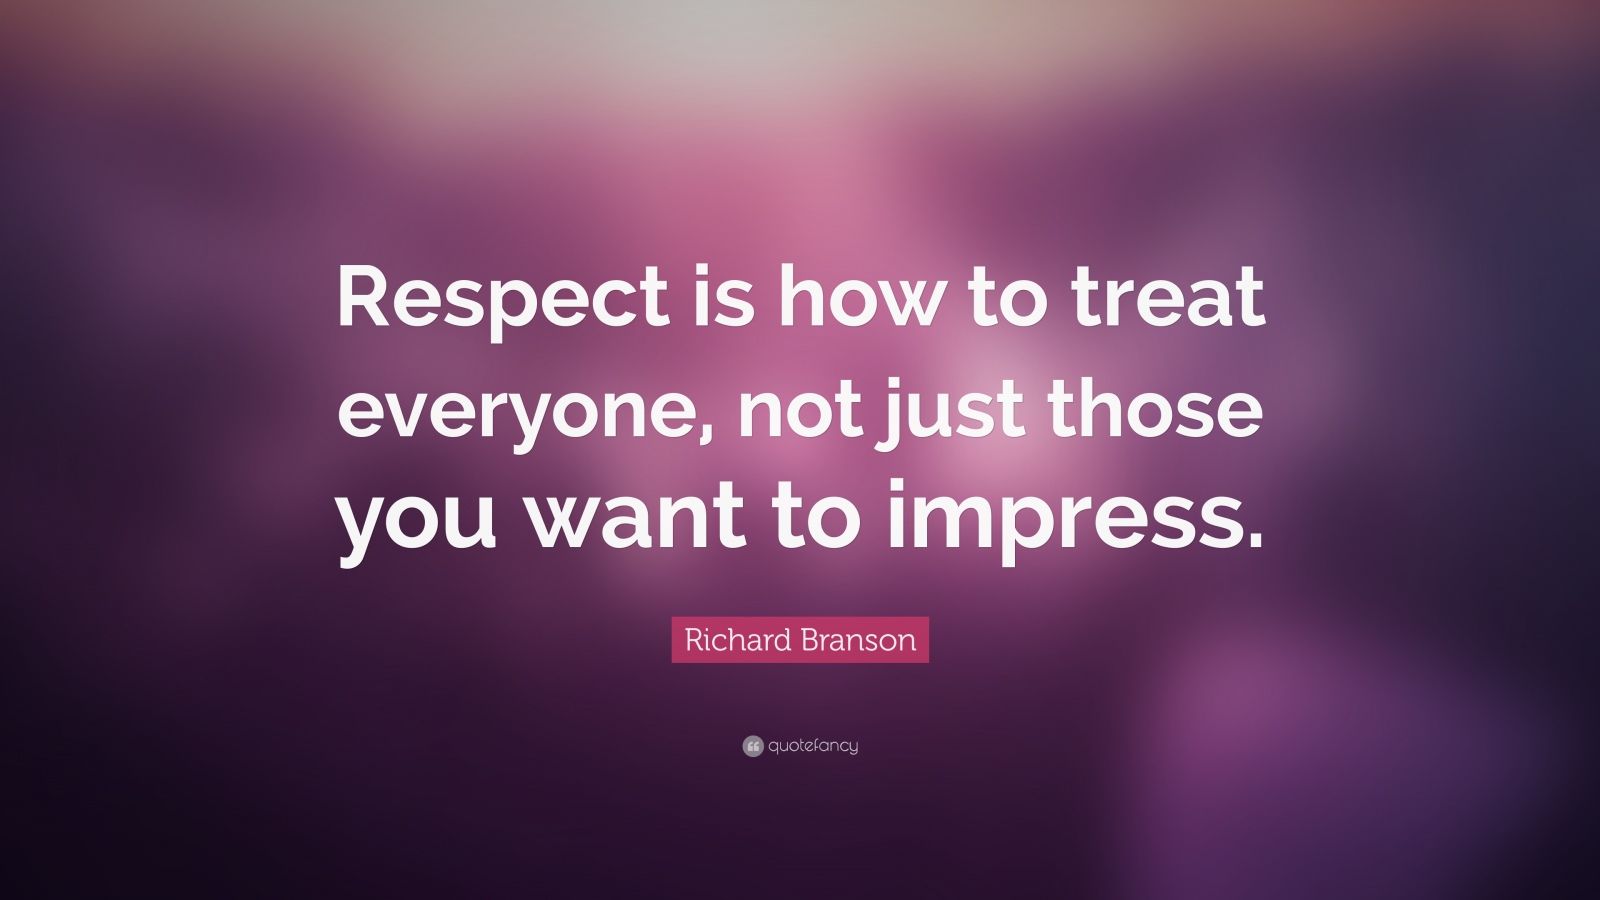 Richard Branson Quote: “Respect is how to treat everyone, not just